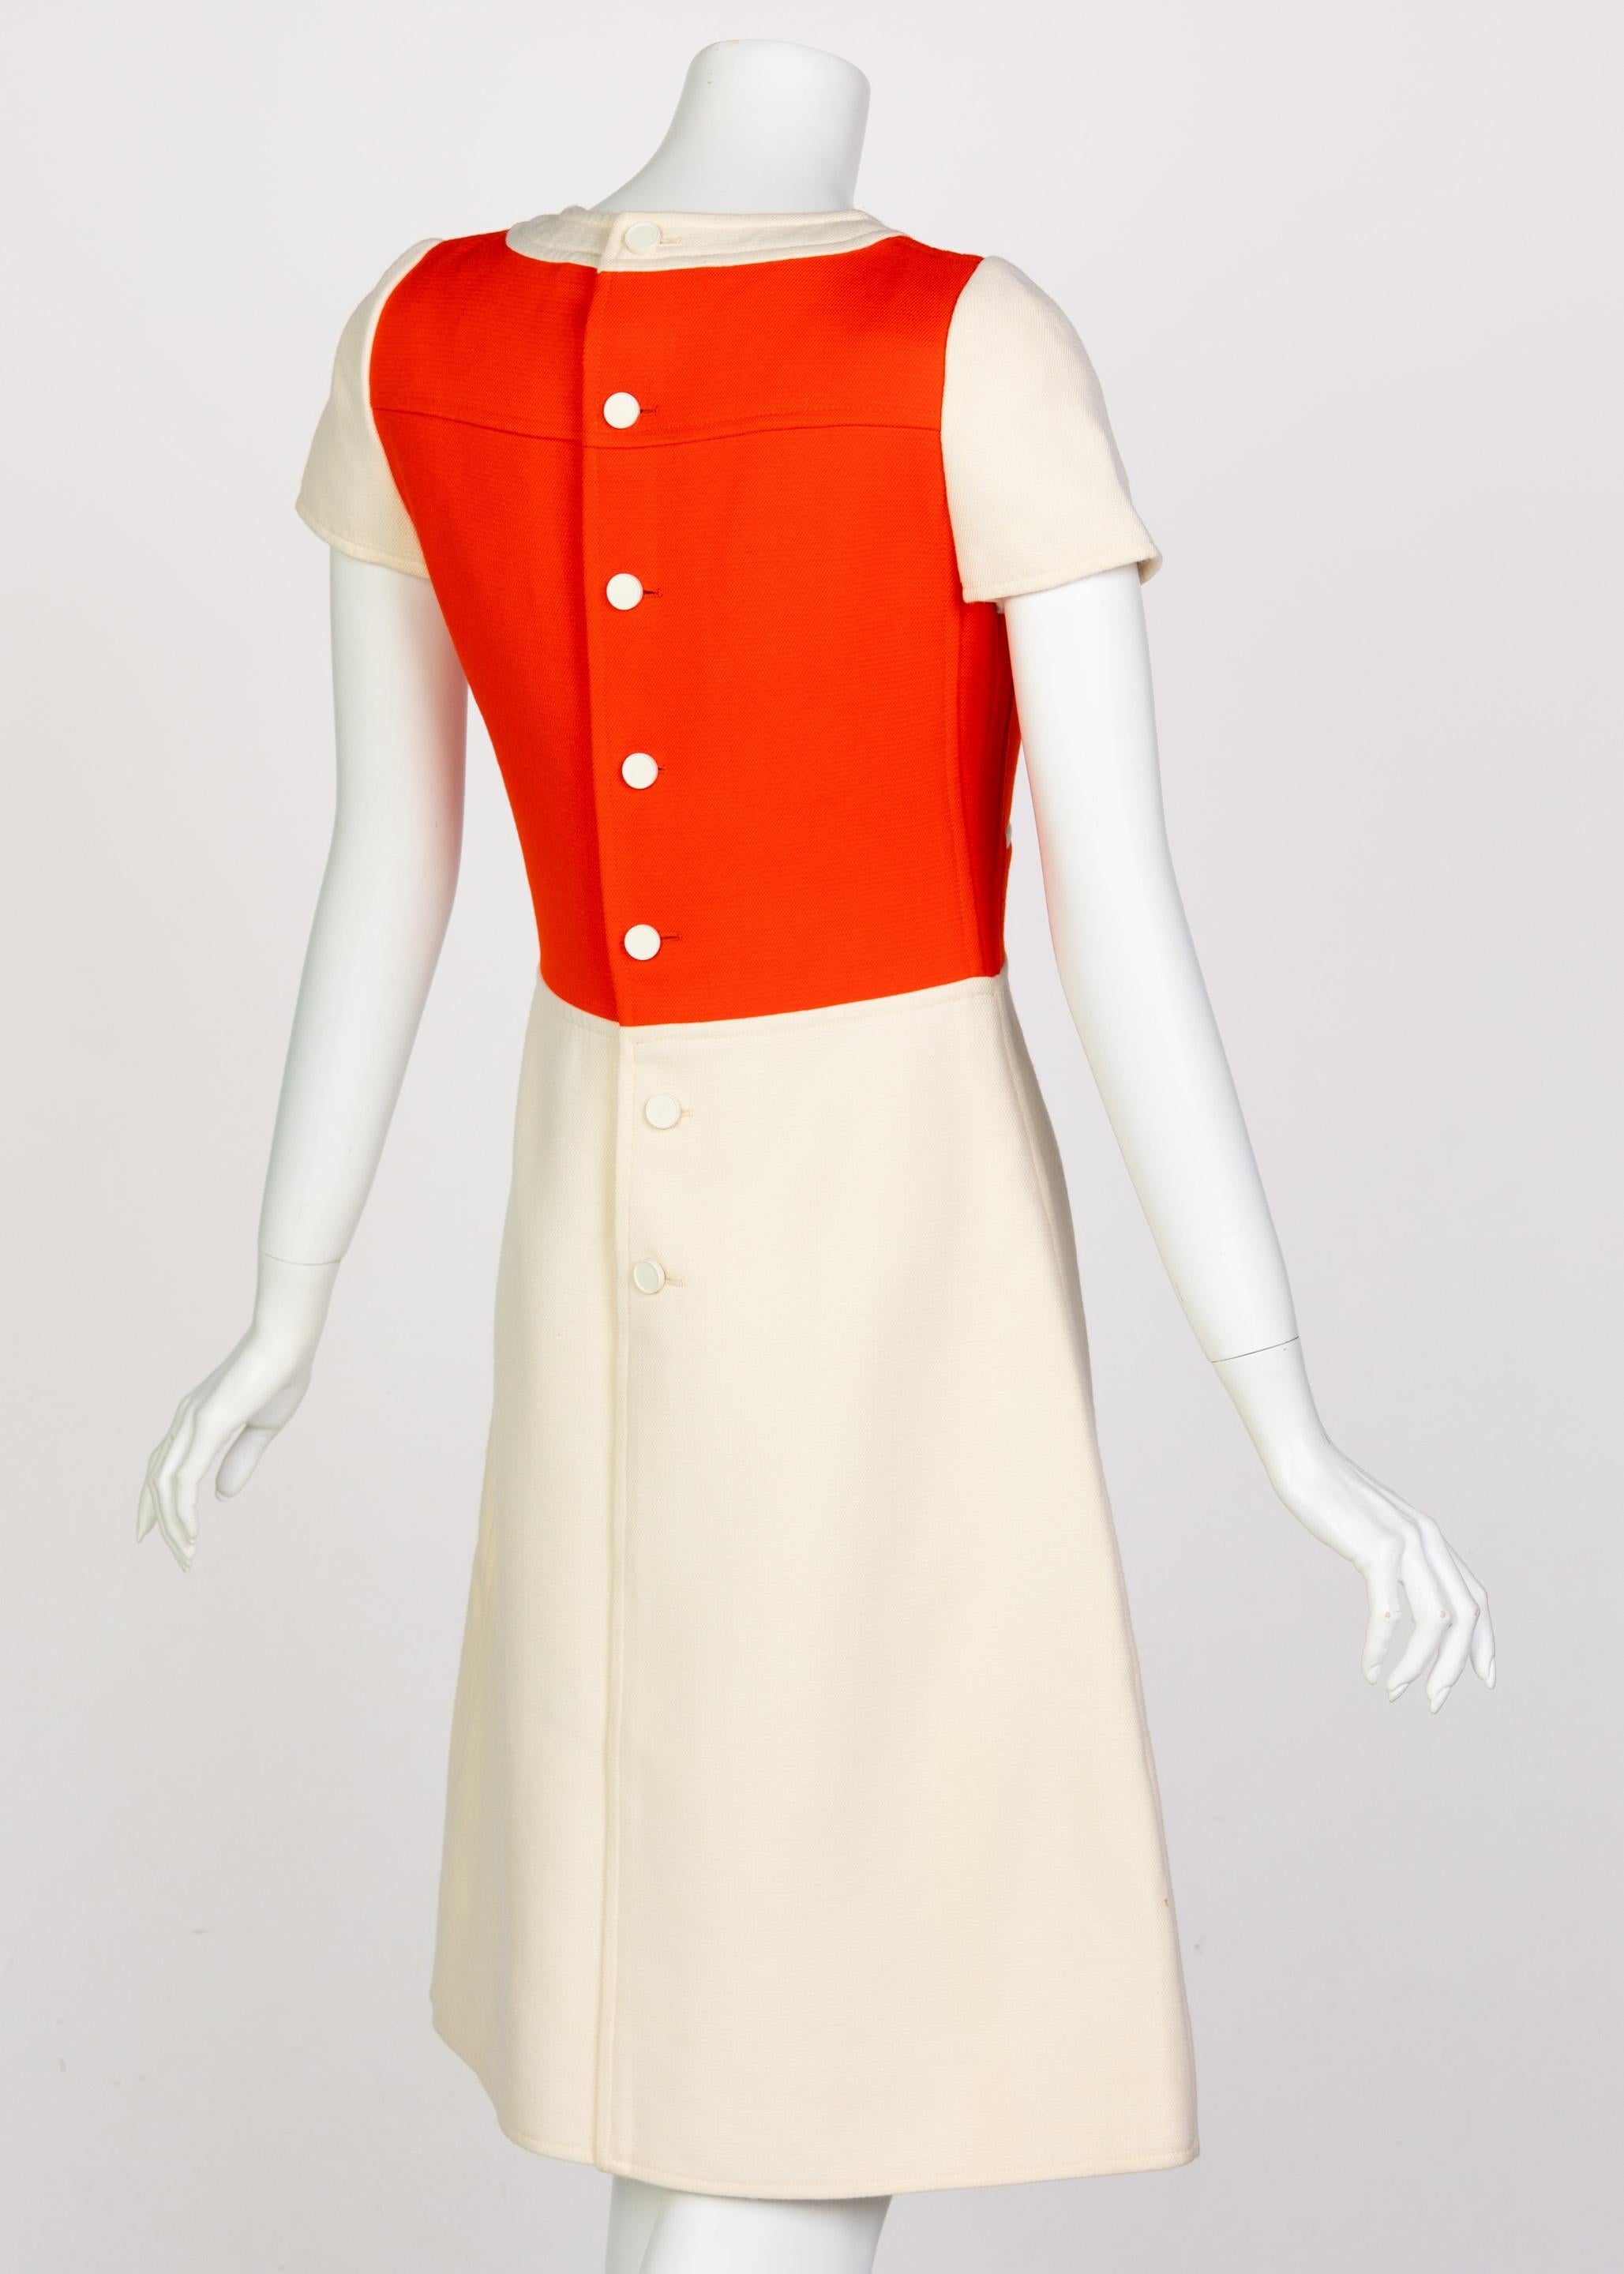 Courreges Numbered Couture Creme Orange Mod a Line Dress, 1960s In Excellent Condition For Sale In Boca Raton, FL